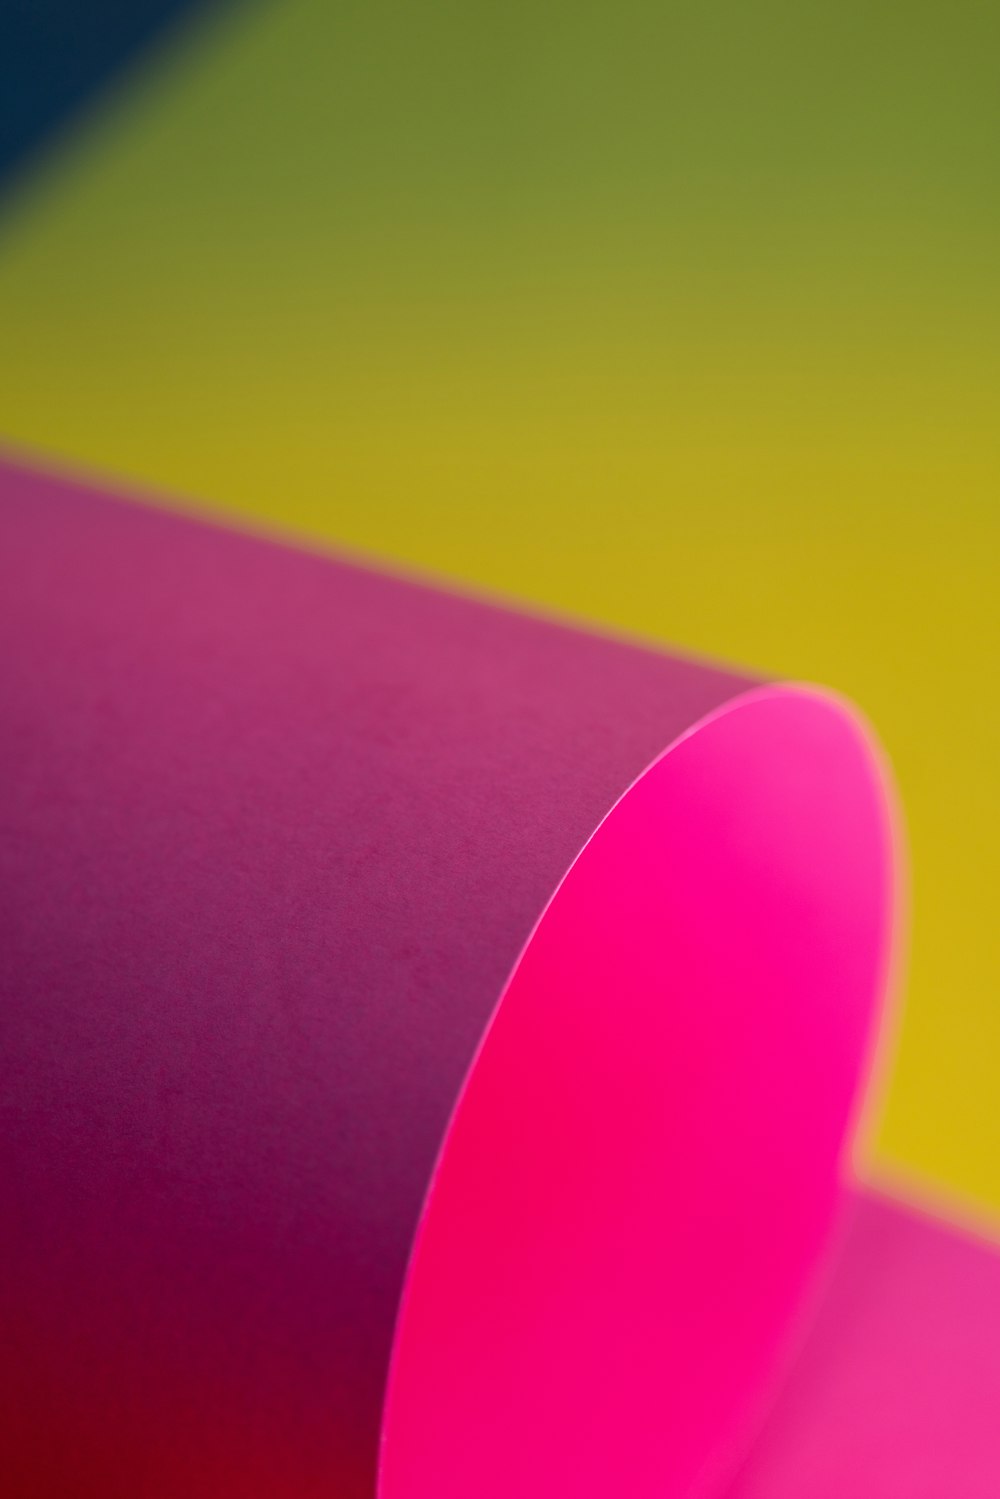 a close up of a pink tube on a yellow and green background